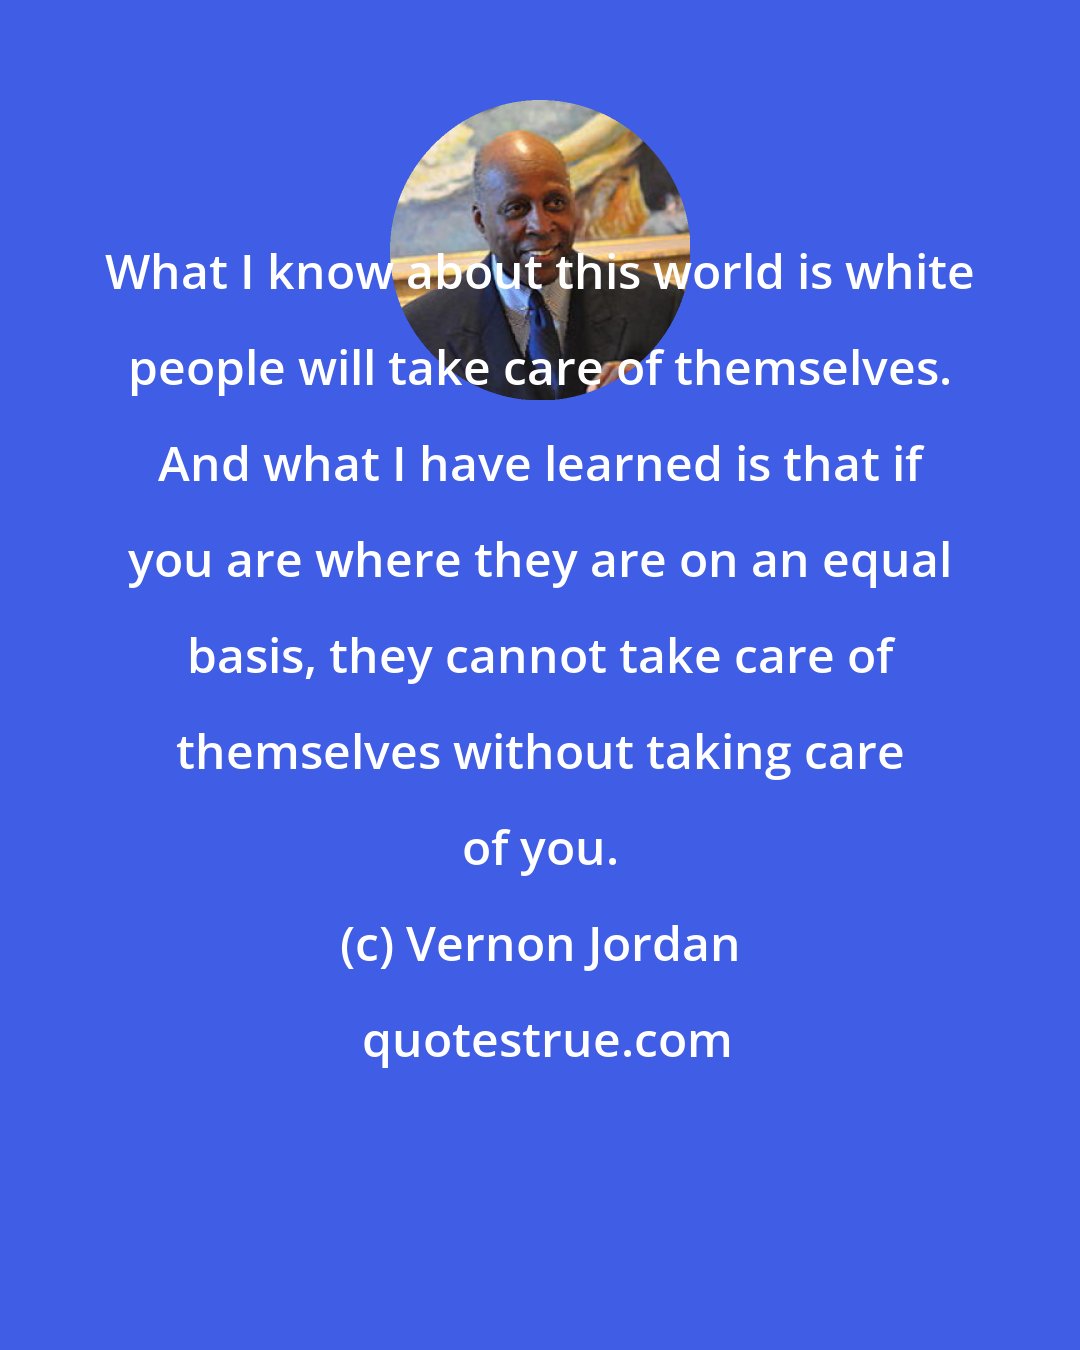 Vernon Jordan: What I know about this world is white people will take care of themselves. And what I have learned is that if you are where they are on an equal basis, they cannot take care of themselves without taking care of you.